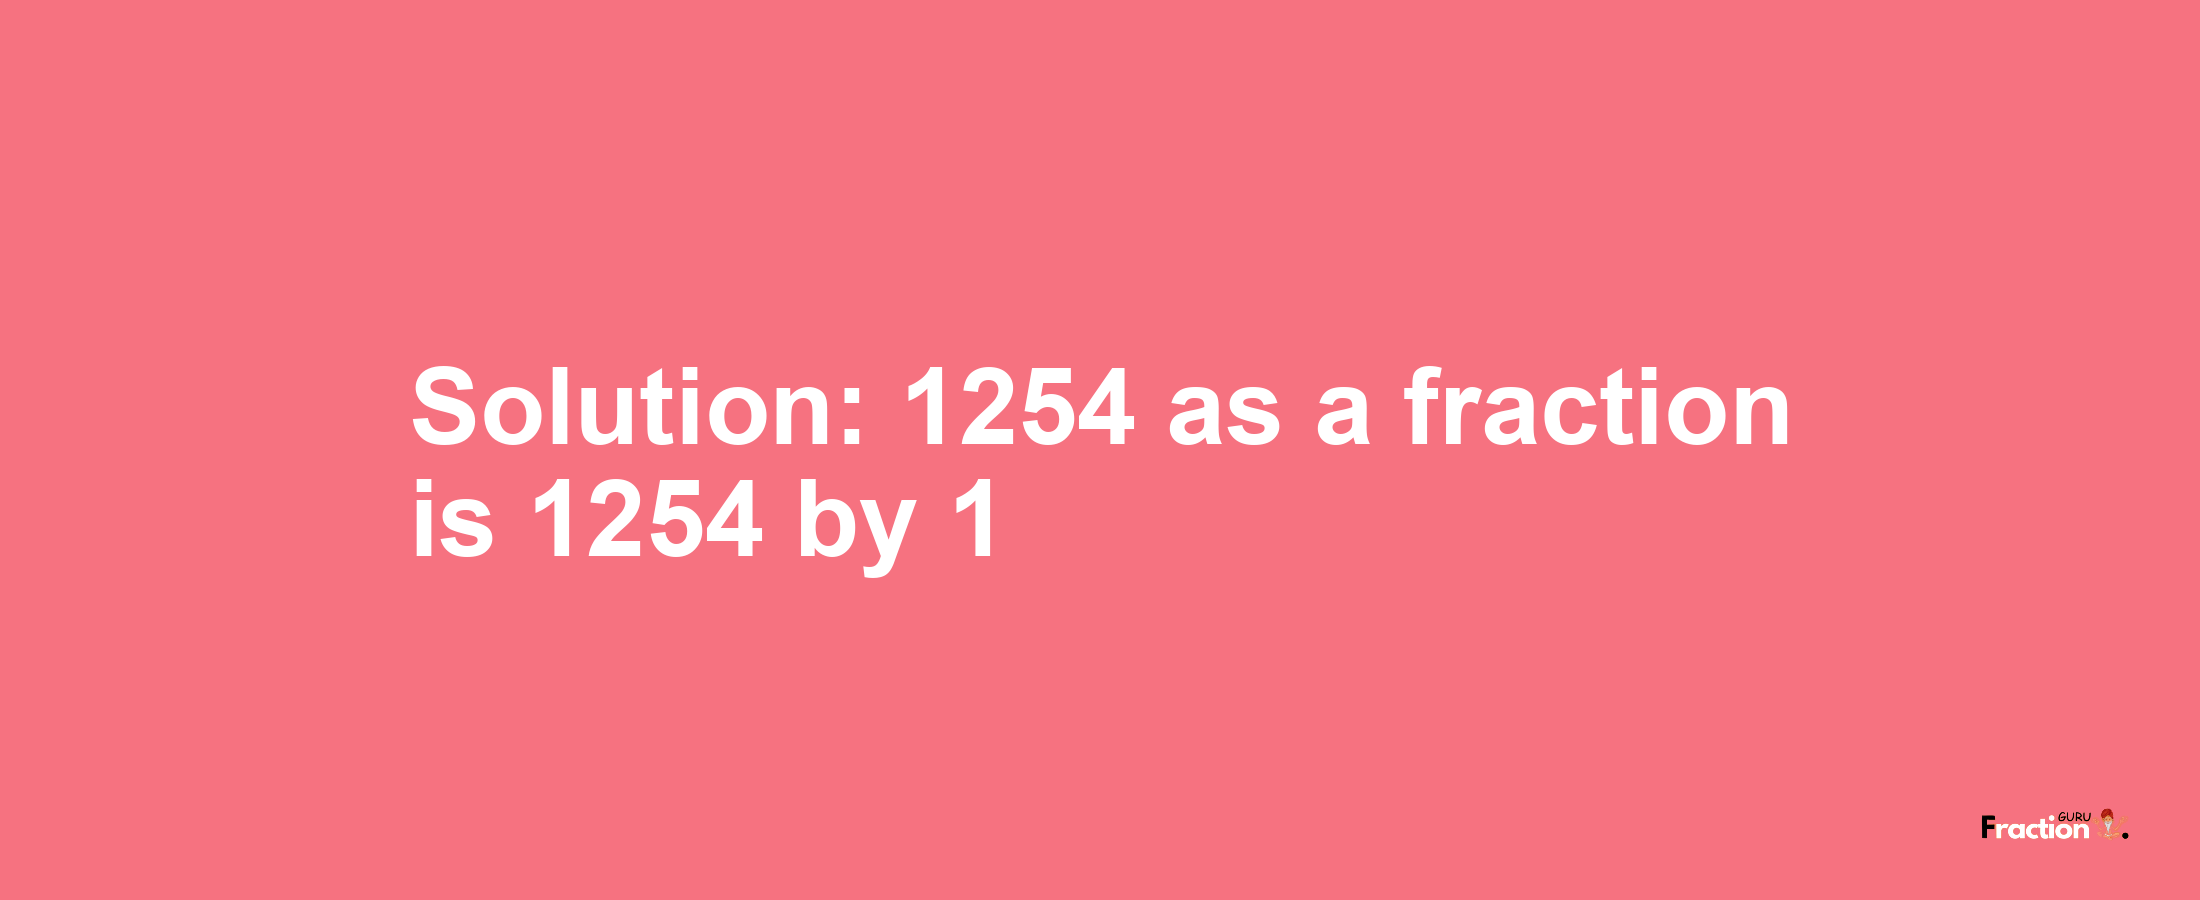 Solution:1254 as a fraction is 1254/1